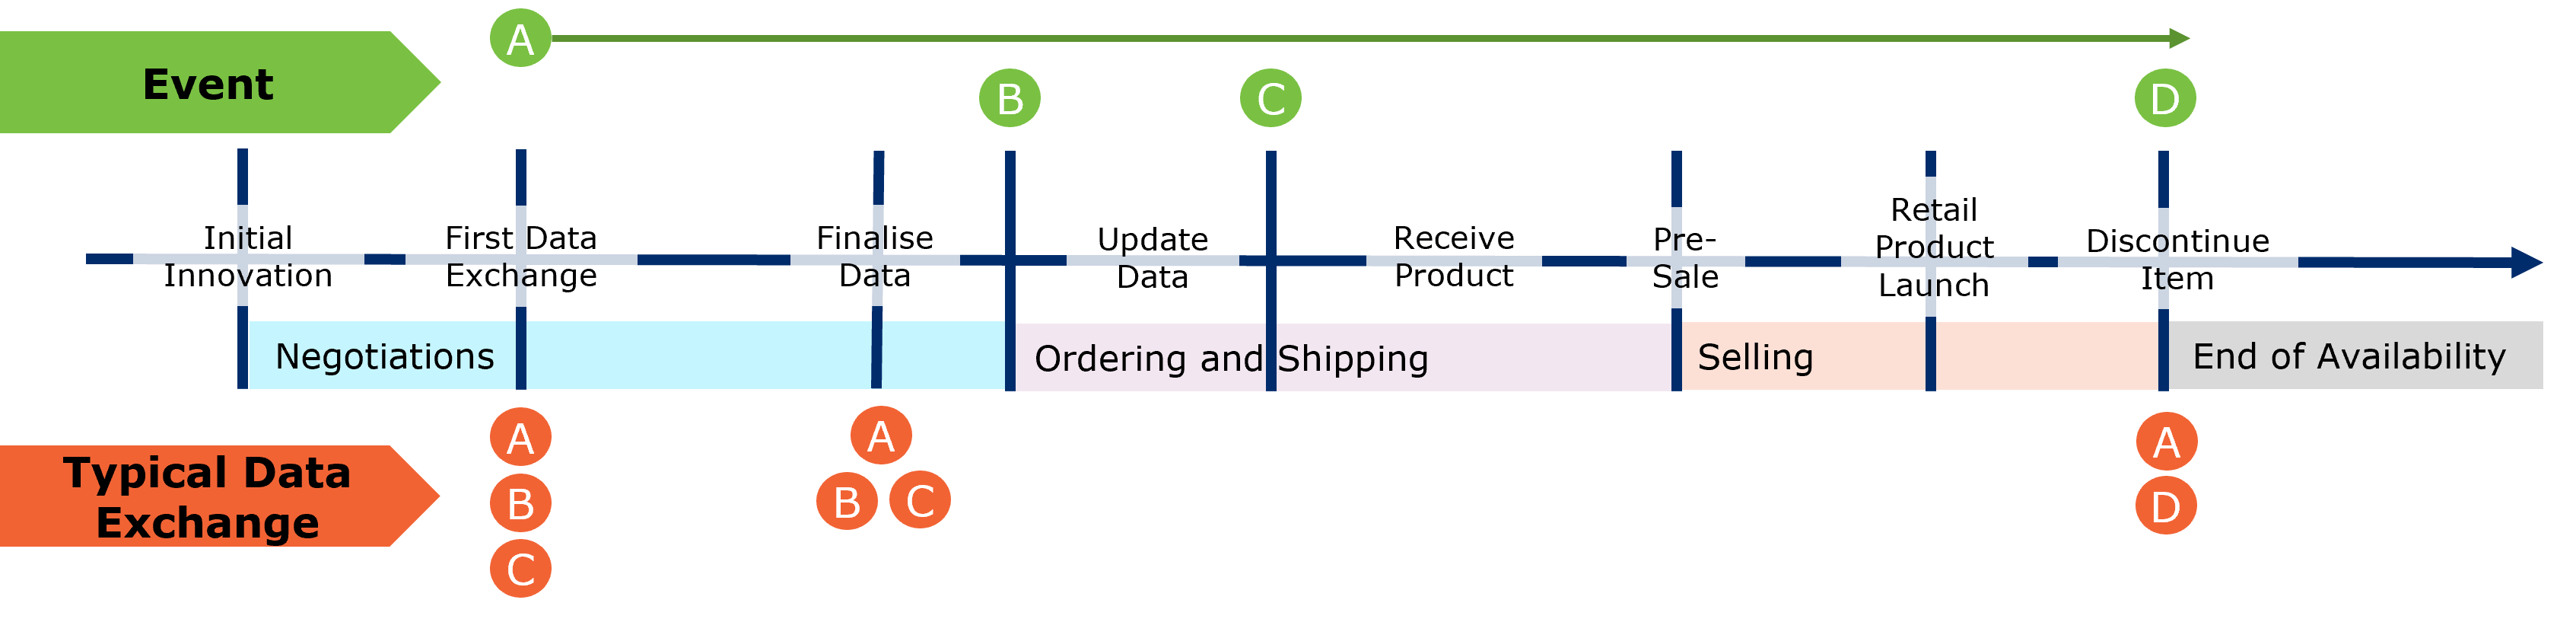 14.1 Product Life Cycle Attributes – Timeline Example - Image 1